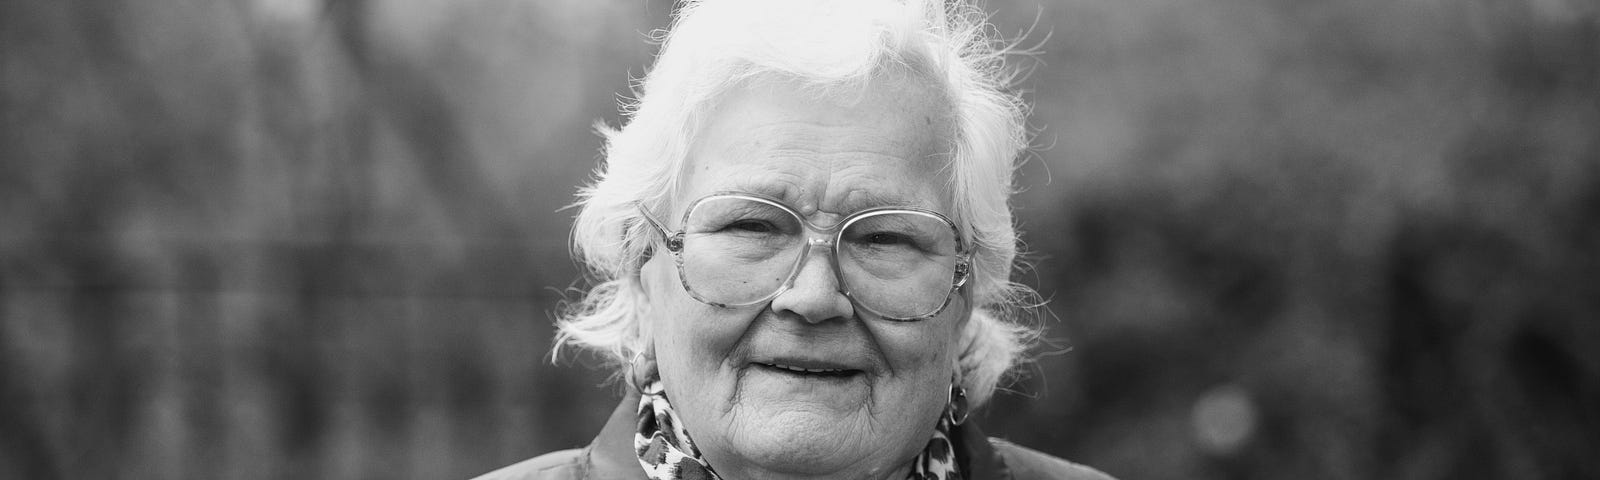 A black and white photo of an old lady with gray hair, glasses and a sly grin